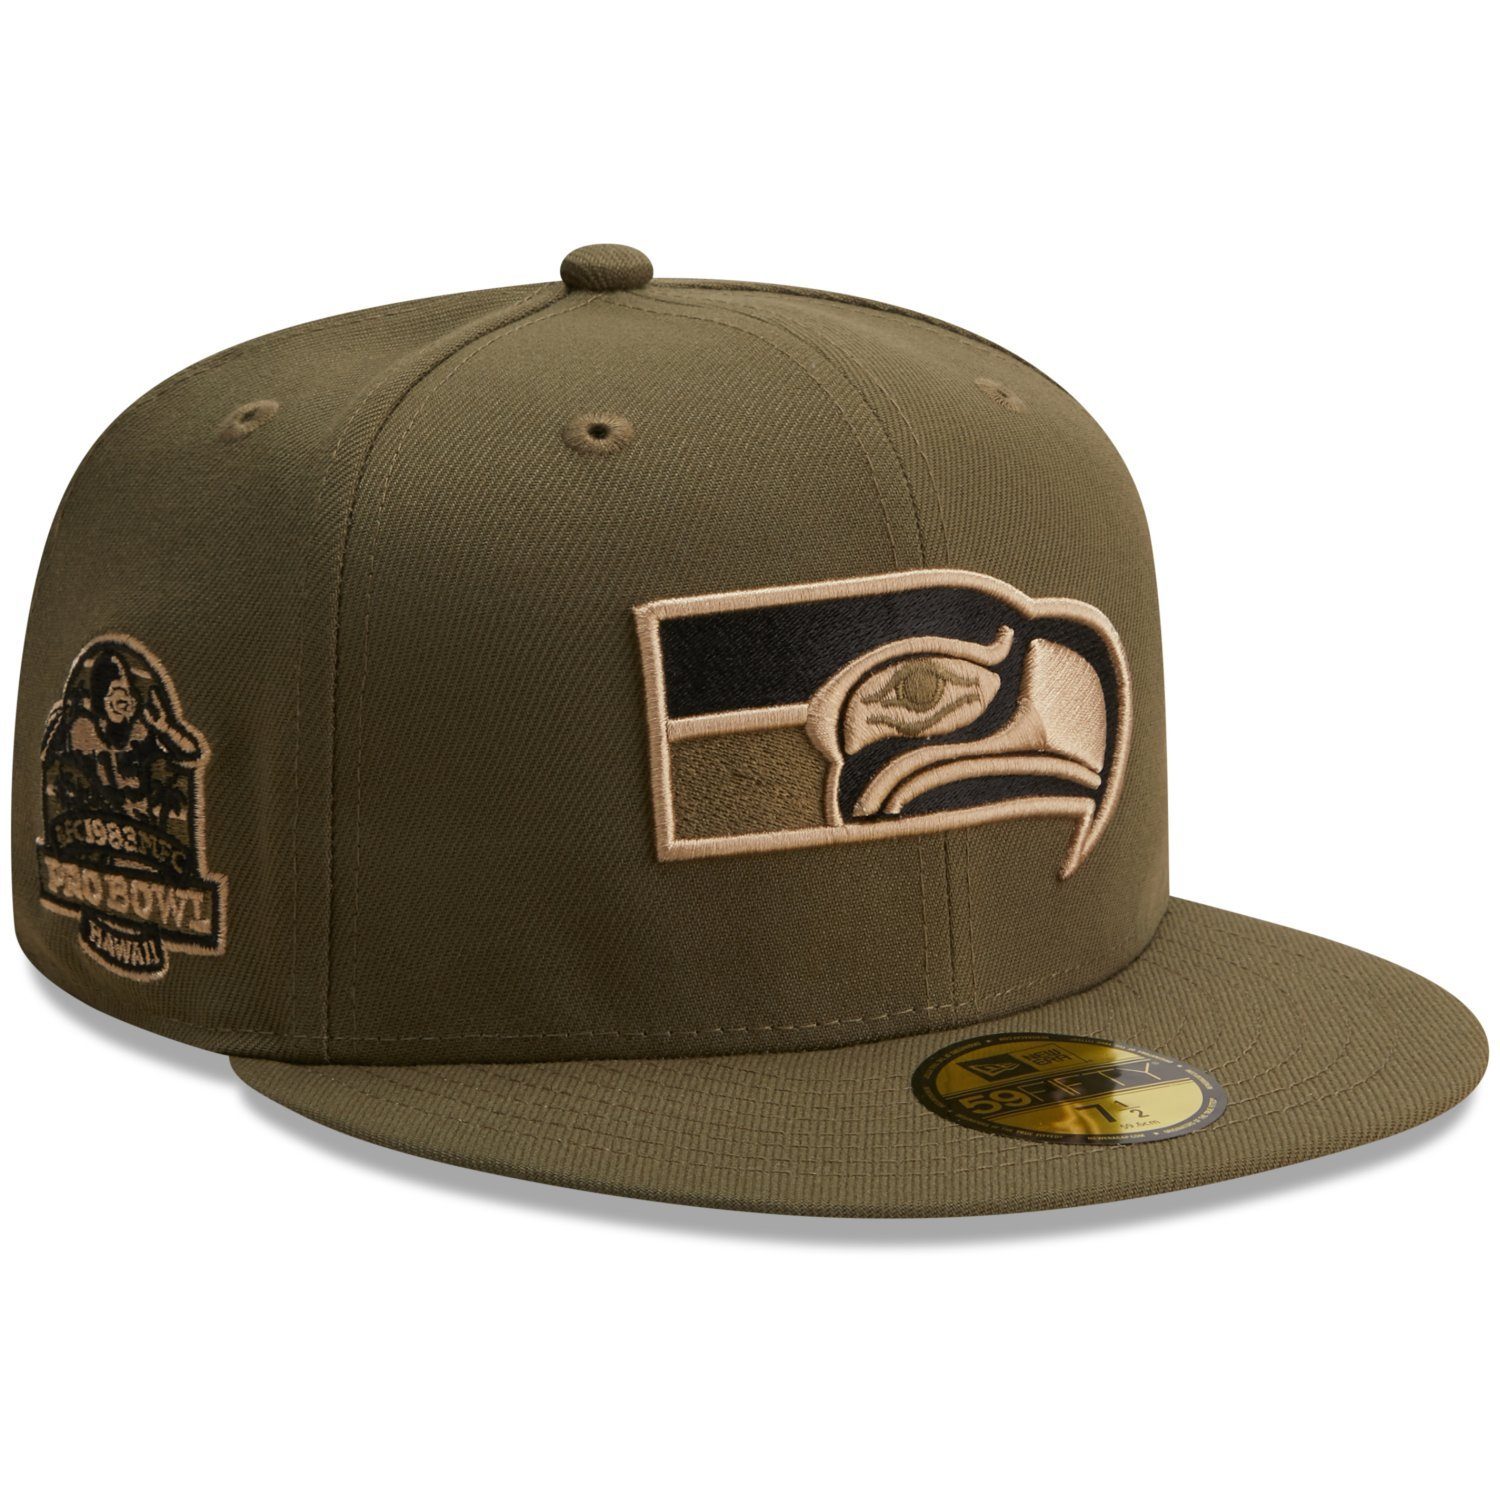 New Era Fitted Cap 59Fifty NFL Throwback Superbowl ProBowl Seattle Seahawks